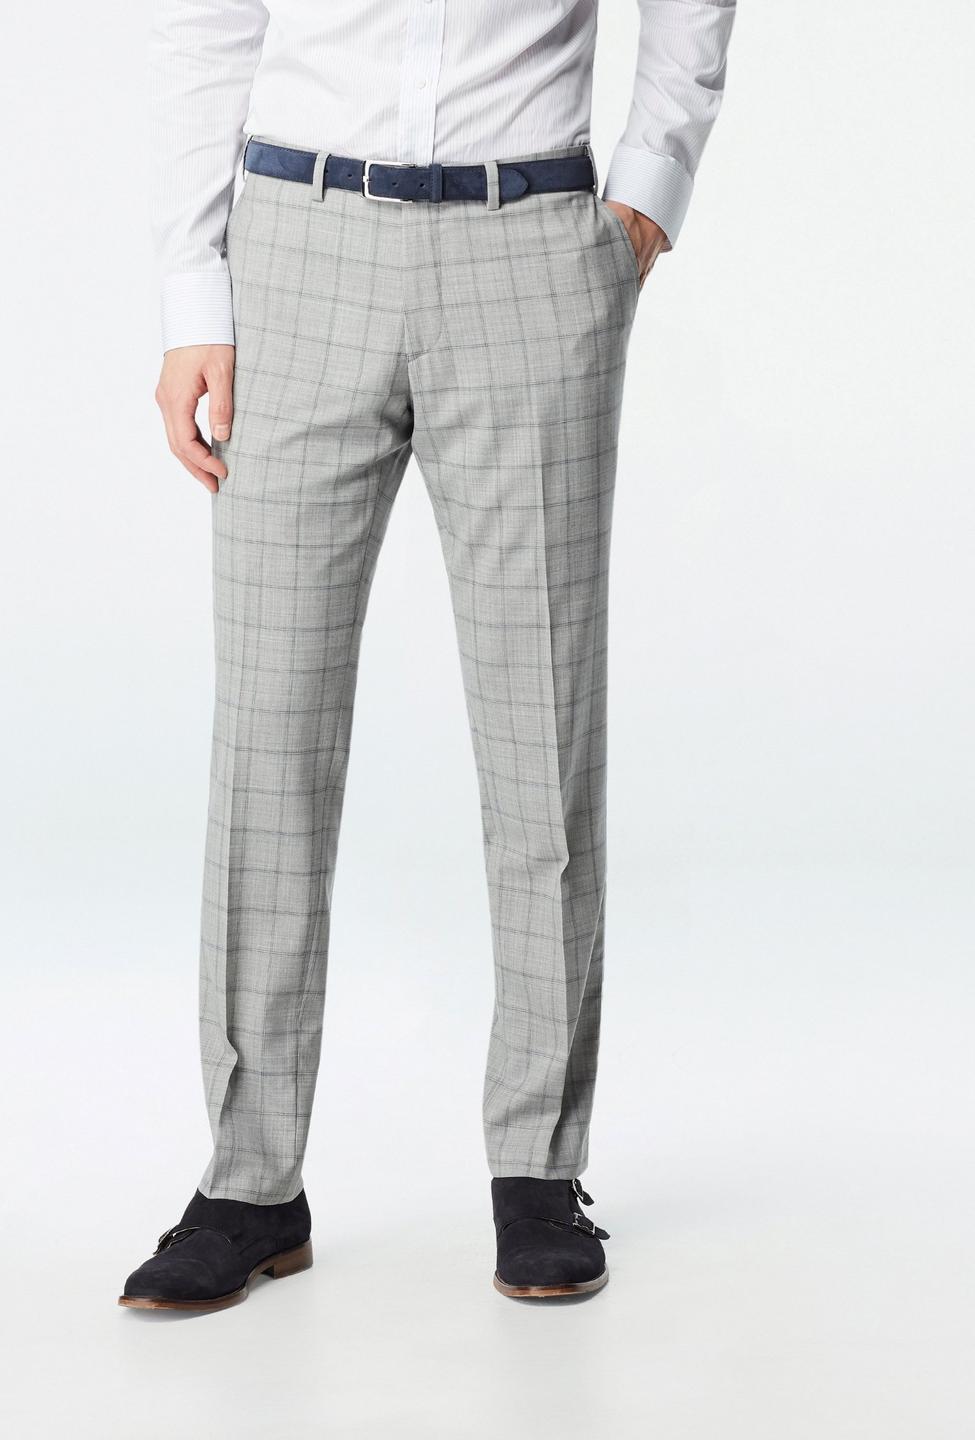 Gray pants - Camden Checked Design from Seasonal Indochino Collection